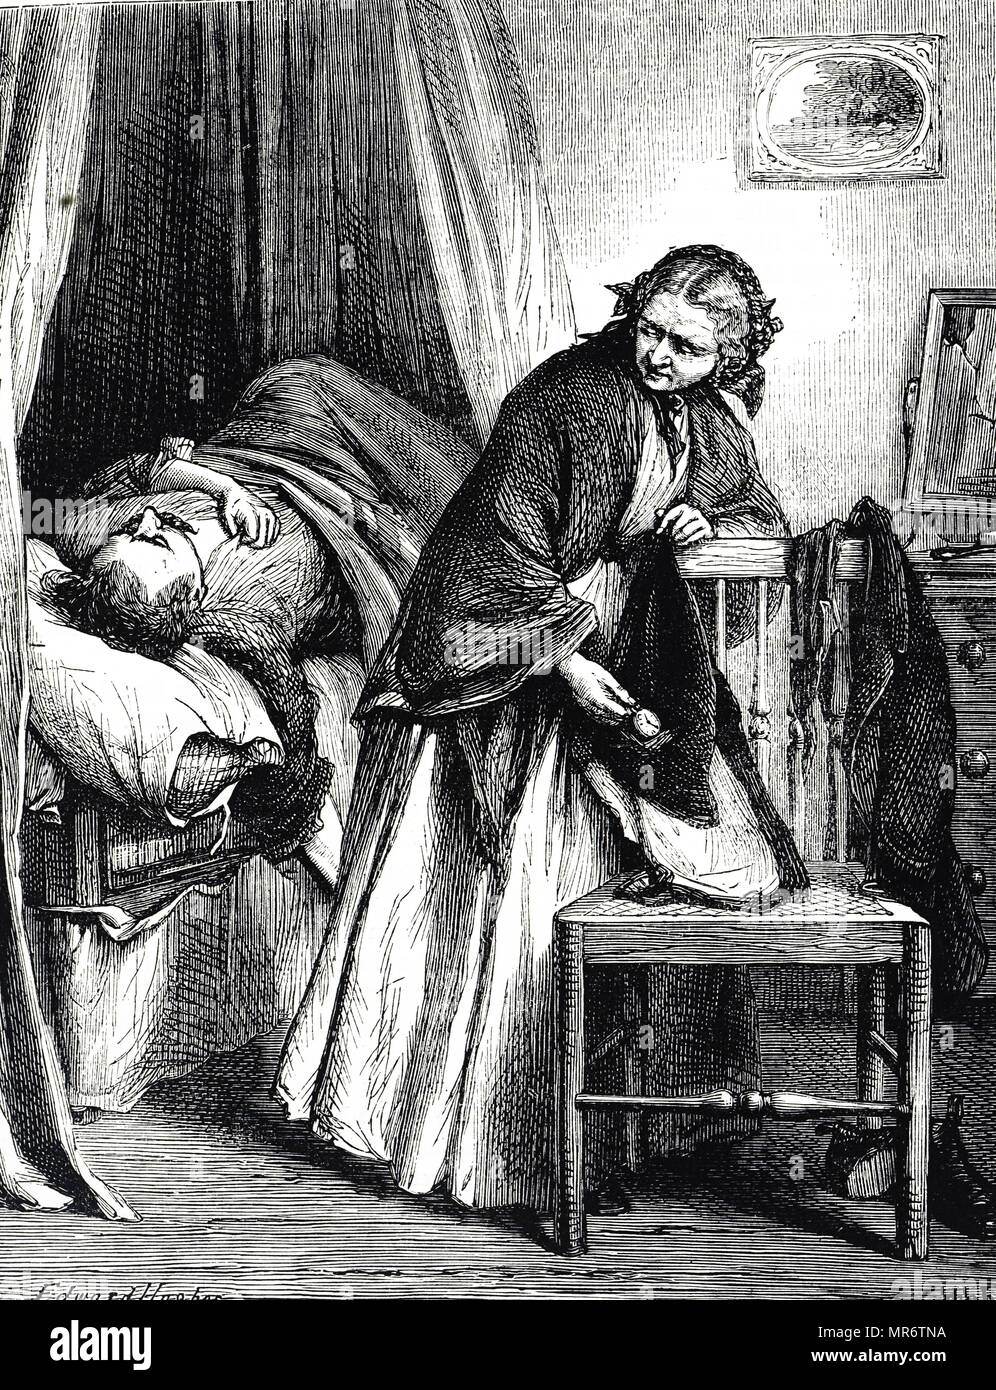 Engraving depicting a landlady stealing rent money from her sick lodger. Illustrated by Edward Hughes (1832-1908) a British artist. Dated 19th century Stock Photo